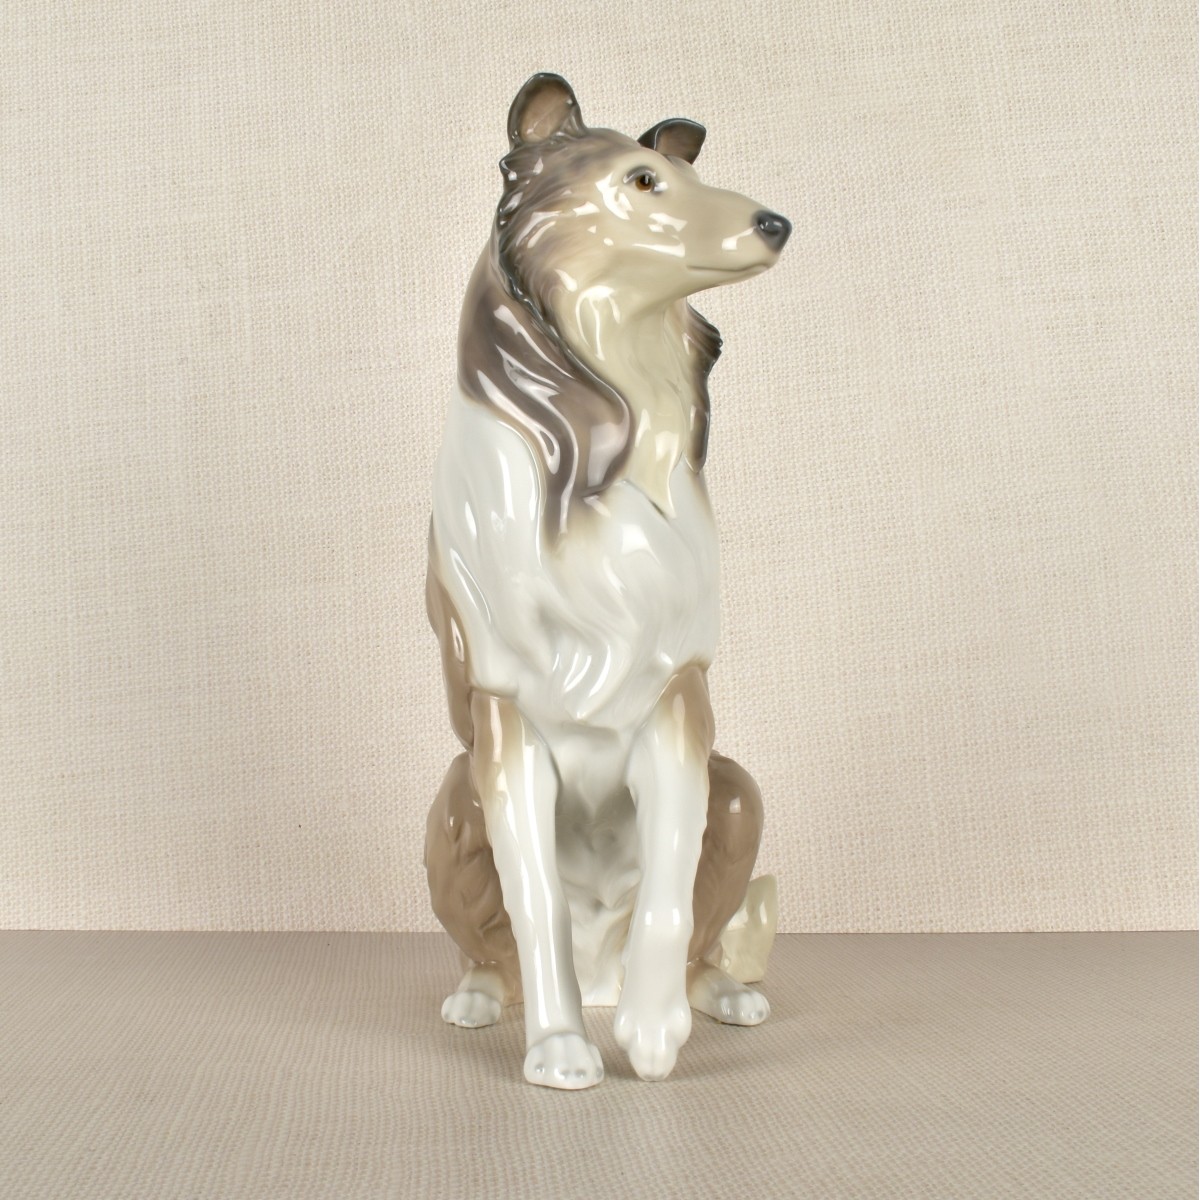 Lladro Figurine of a Collie